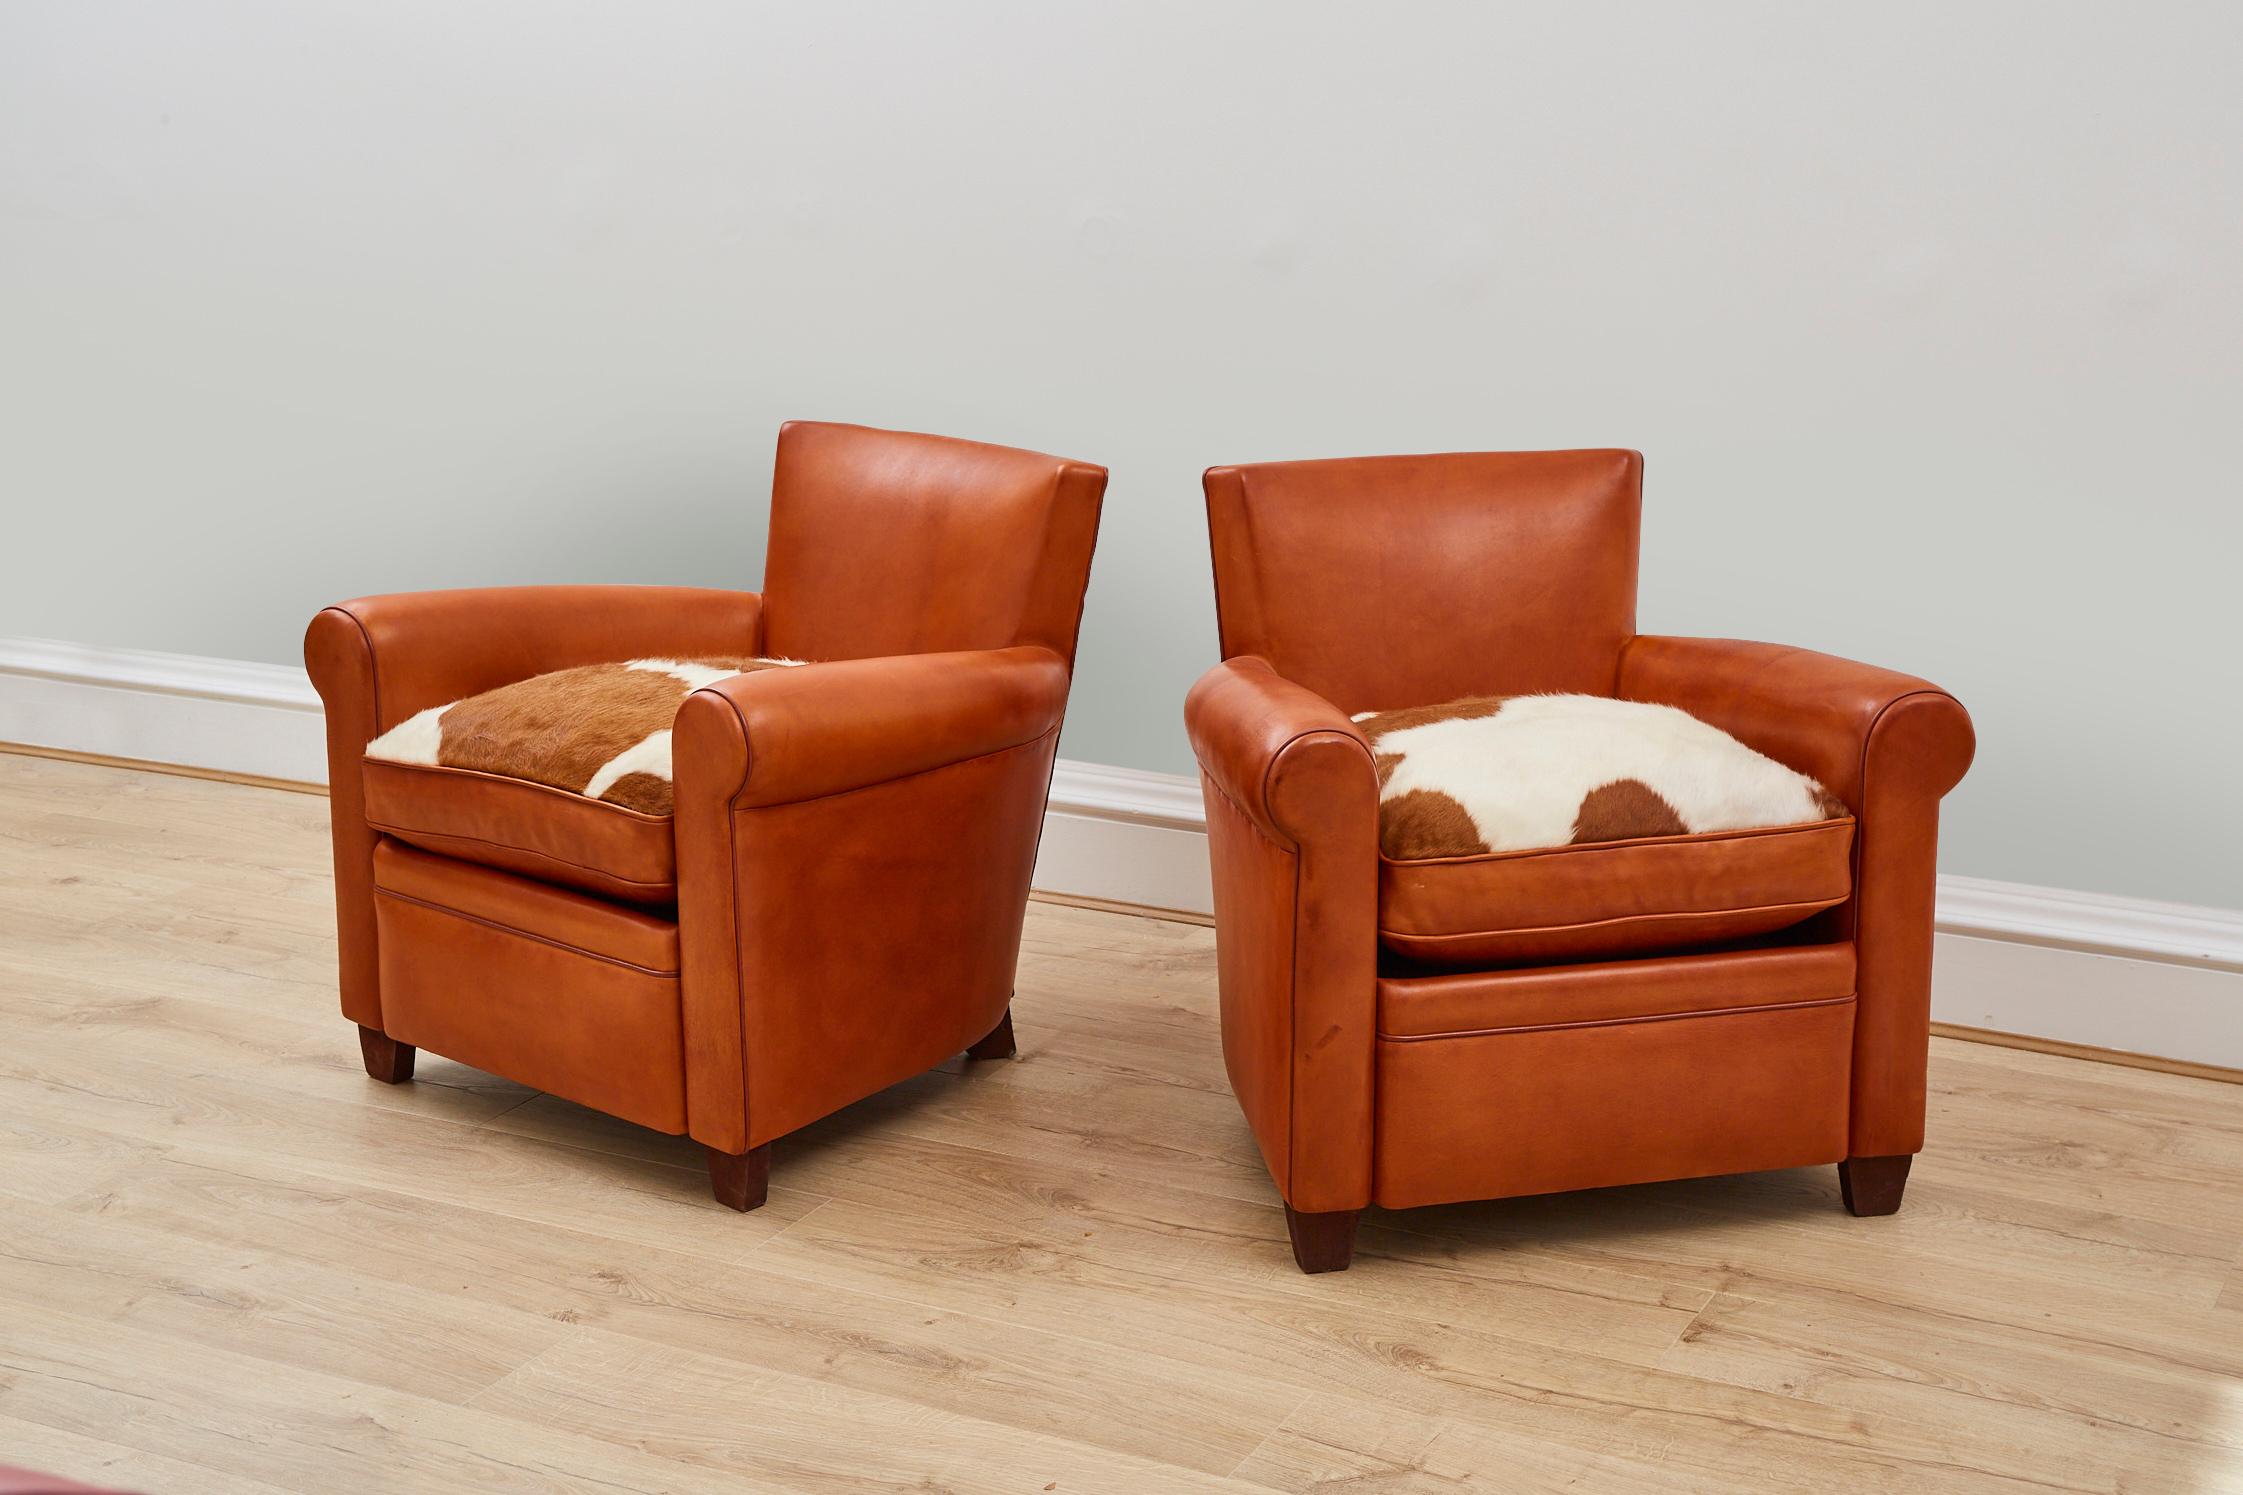 A stylish pair of tan leather armchairs featuring reversible seats -tan leather on one side with tan and white natural cow hide to the other. 

These chairs have been hand made with traditional methods - steel studded detail to the back of the